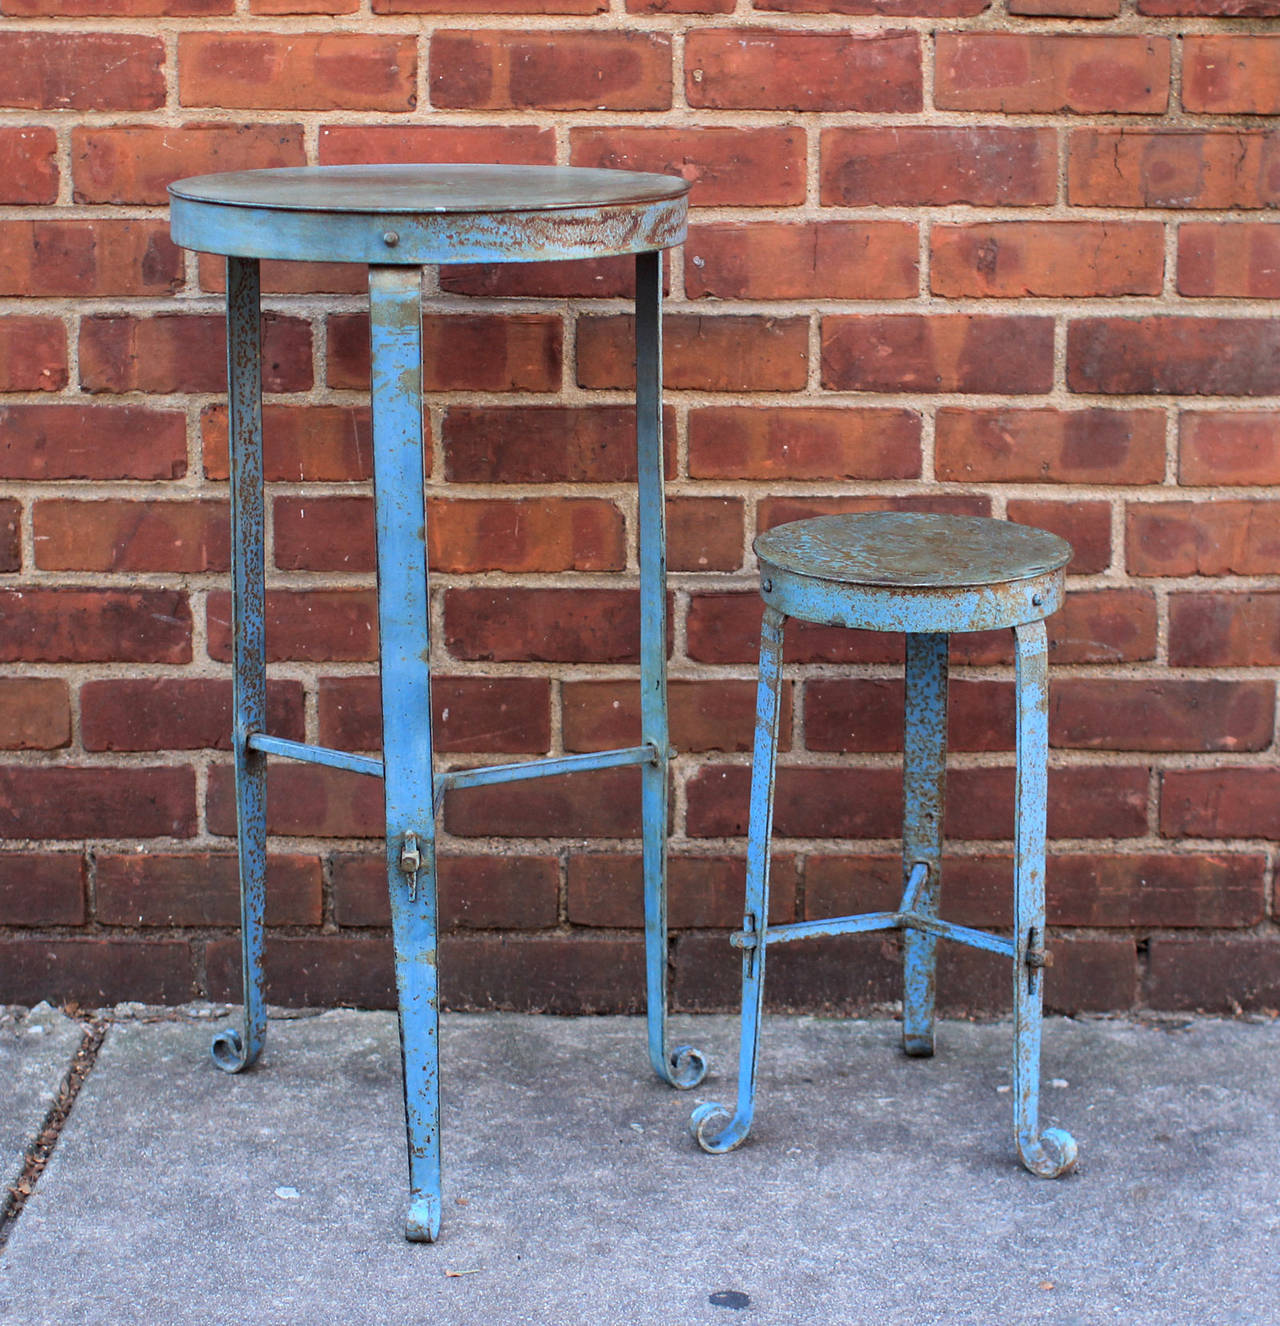 Pair of blue painted iron stands with Arts & Crafts details of faux peg construction and a whimsical curved foot; probably American, early 20th century. The smaller one measures 20